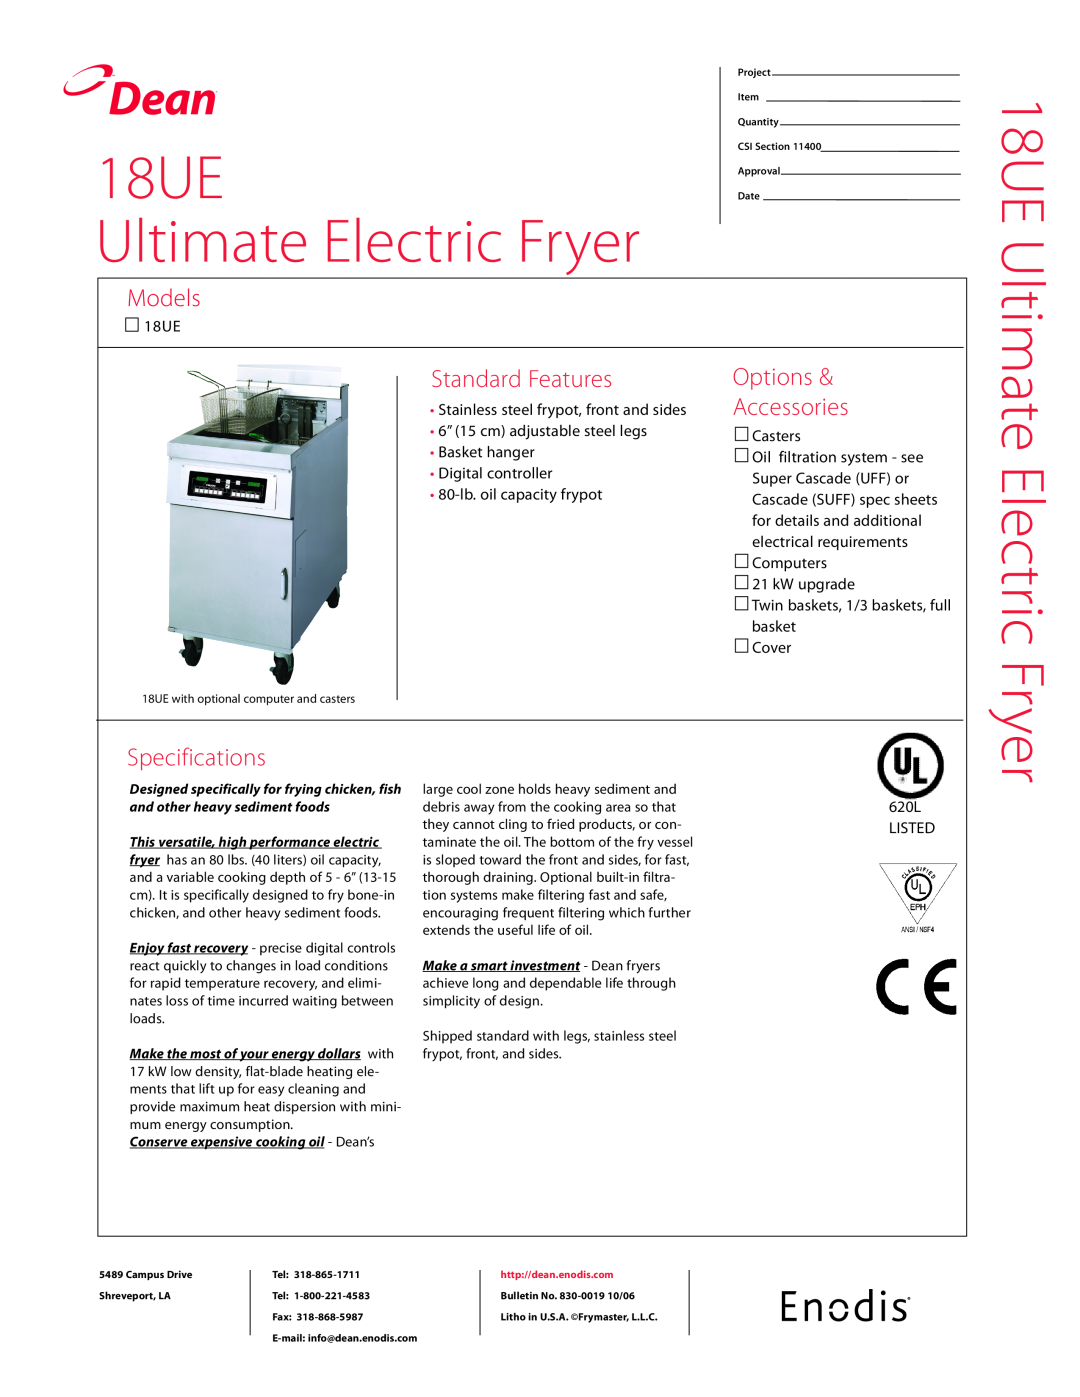 Teac specifications Dean, 18UE Ultimate Electric Fryer, Models, Standard Features, Options Accessories, Casters 